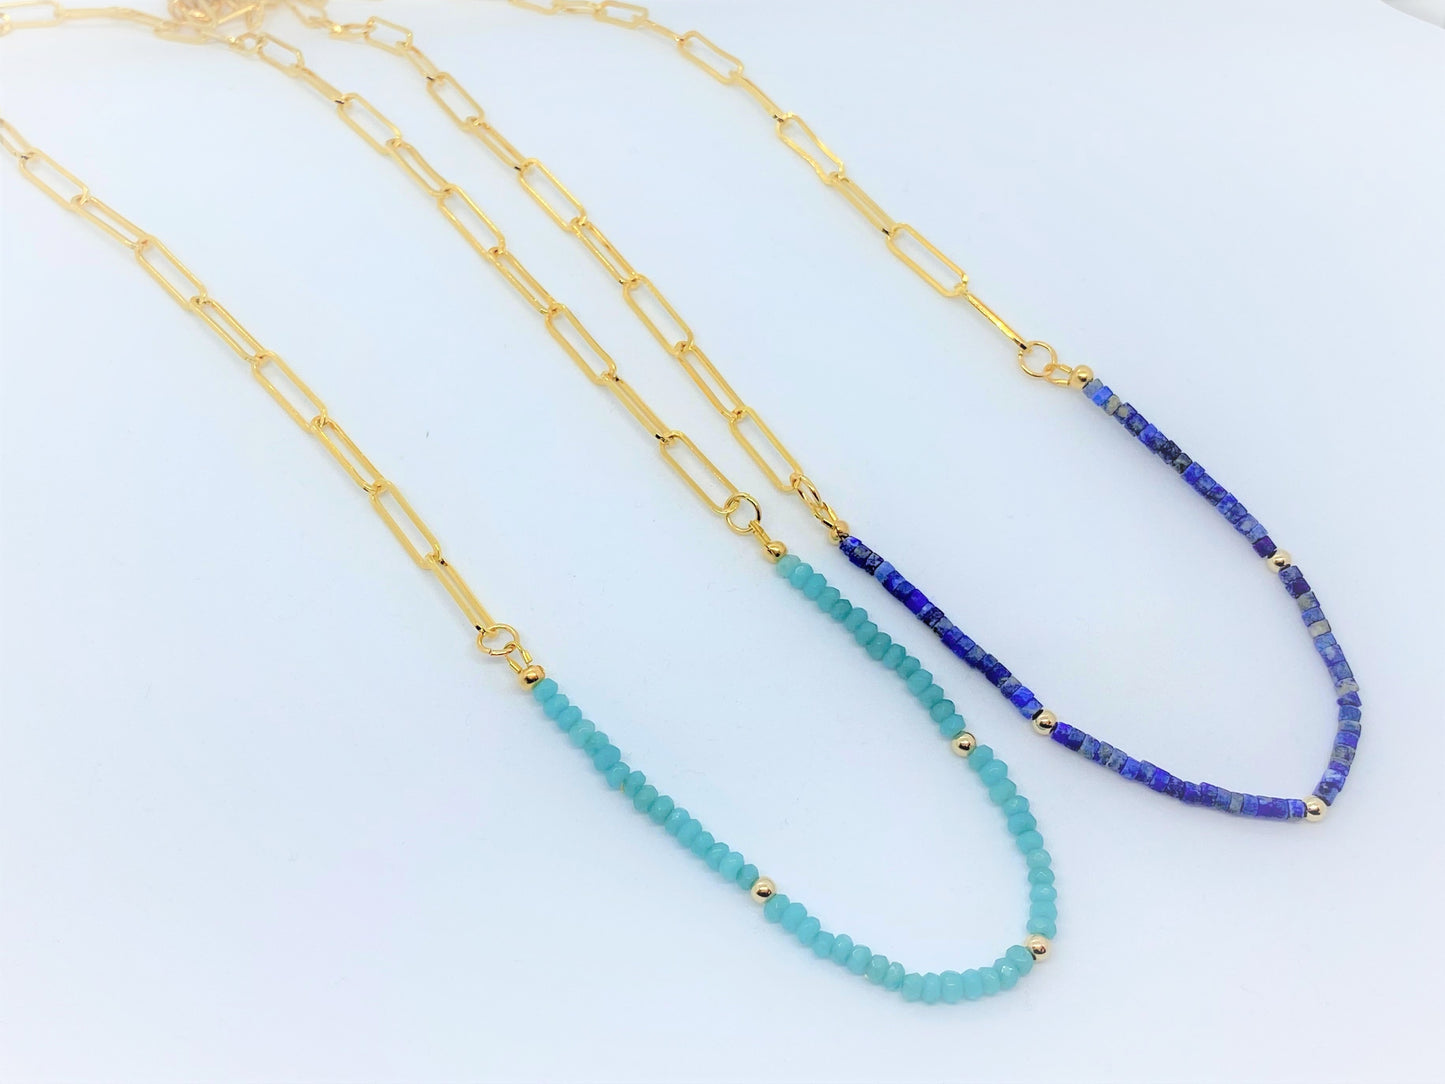 Paperclips and Gemstones - Emmis Jewelry, Necklace, Bracelet, [product_color]